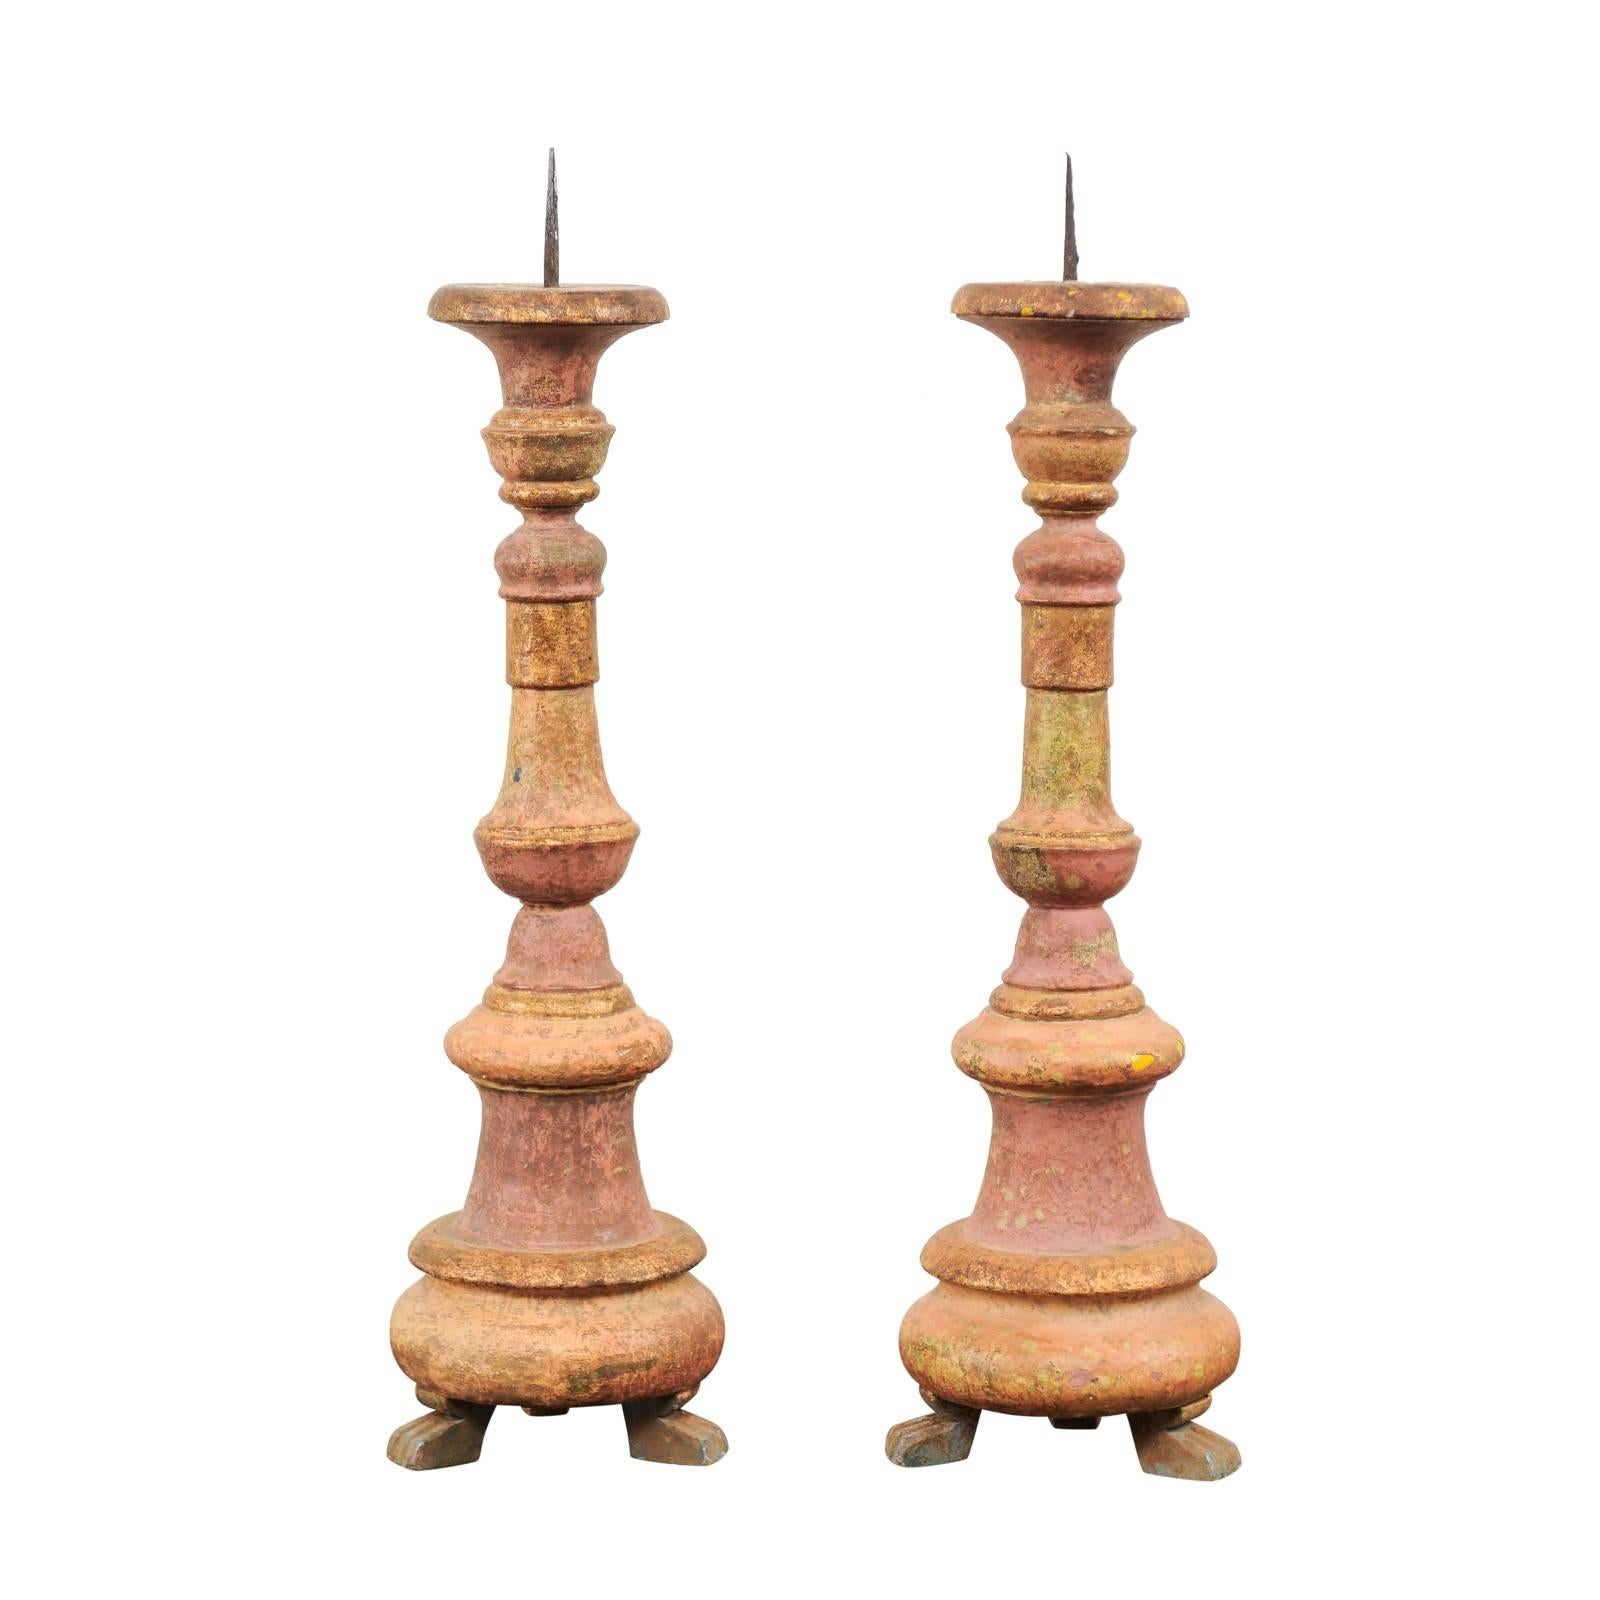 Pair of Portuguese 19th Century Wood Candlesticks with Original Paint